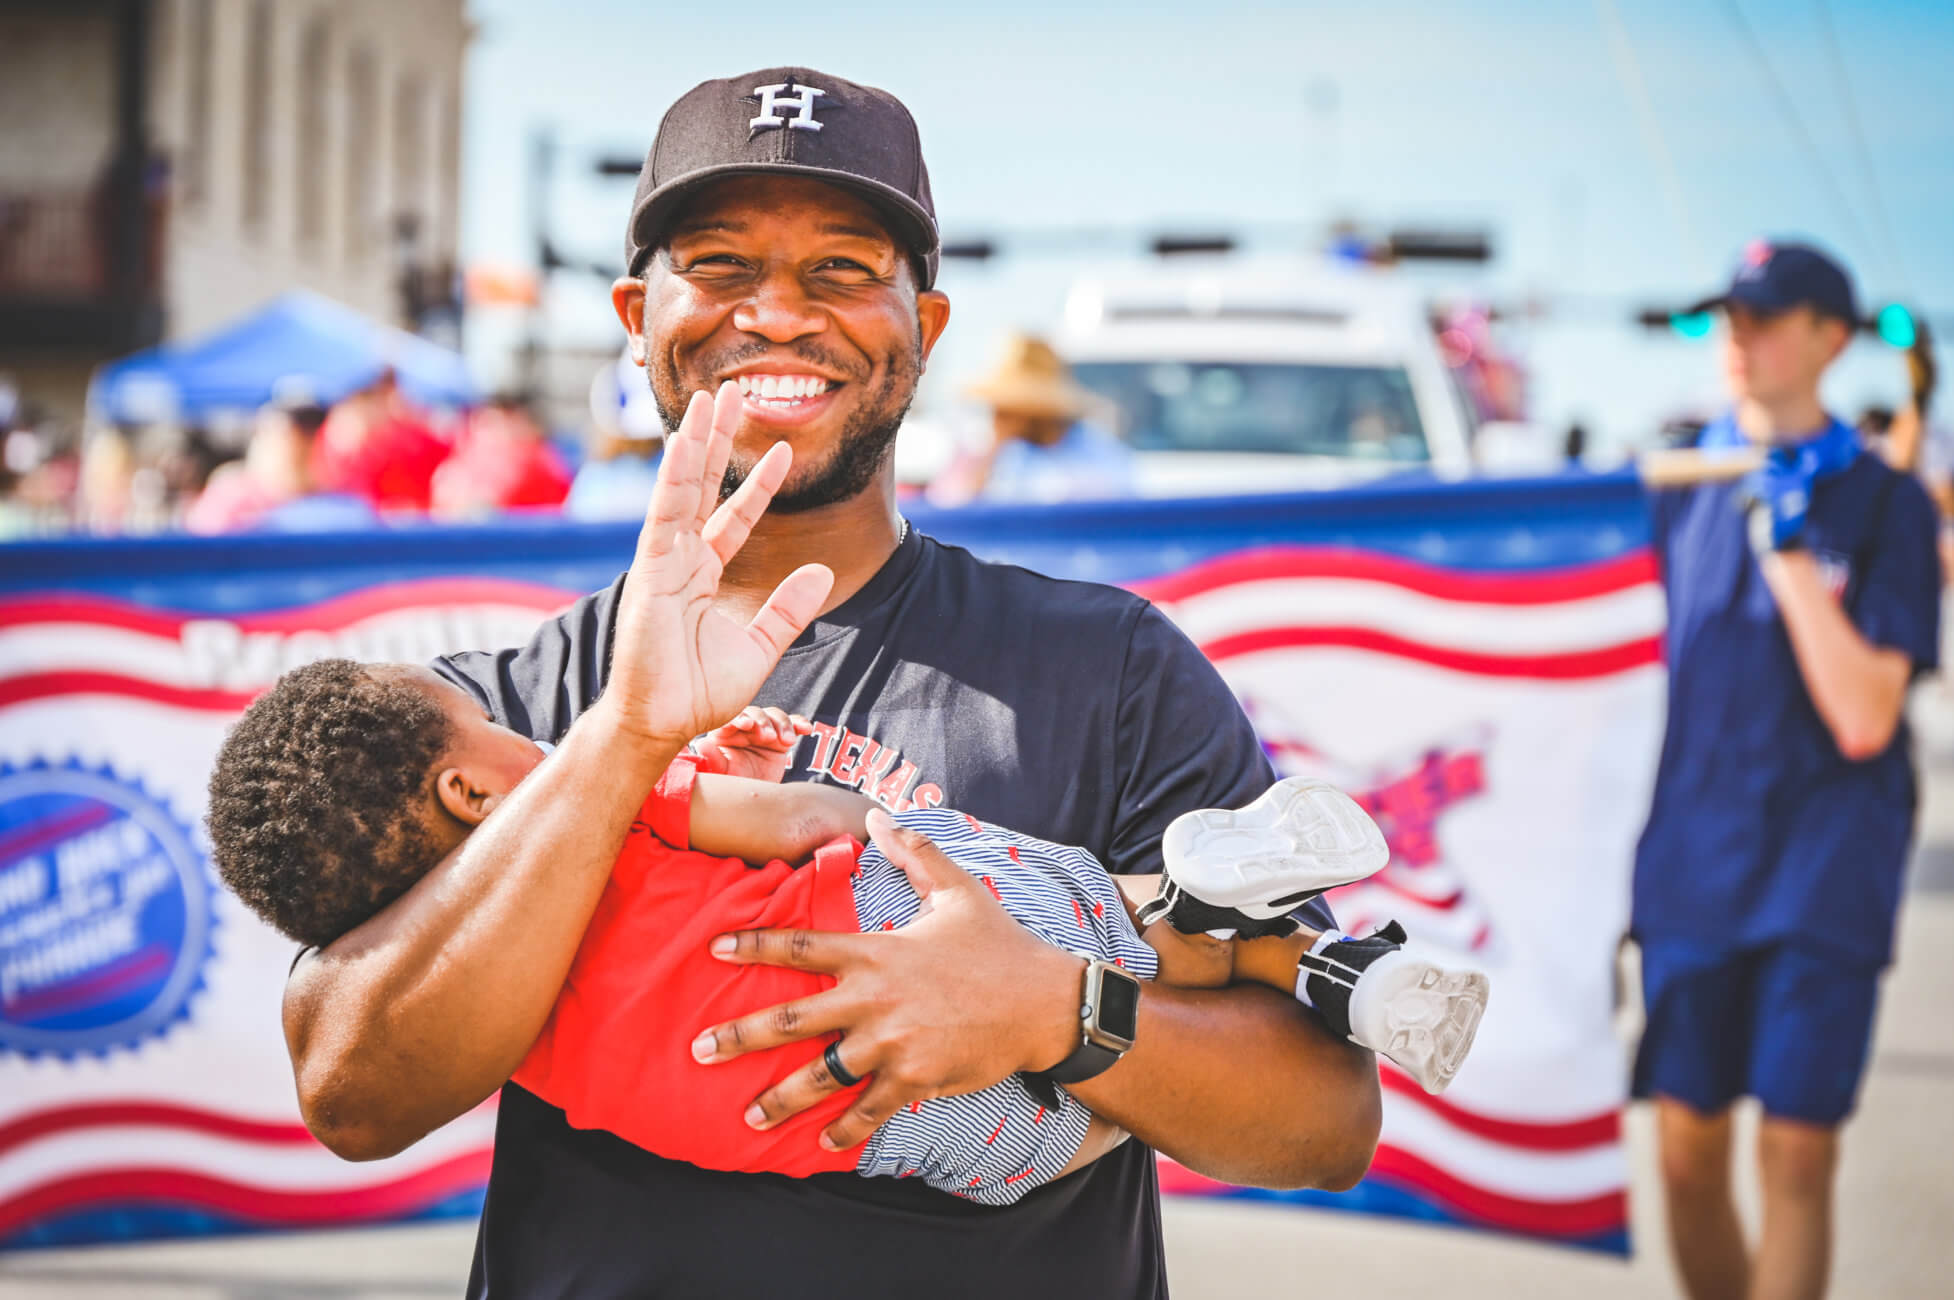 Smiling man in black baseball cap and black shirt waves to the camera while holding his young child. The parade can be seen in the background. 